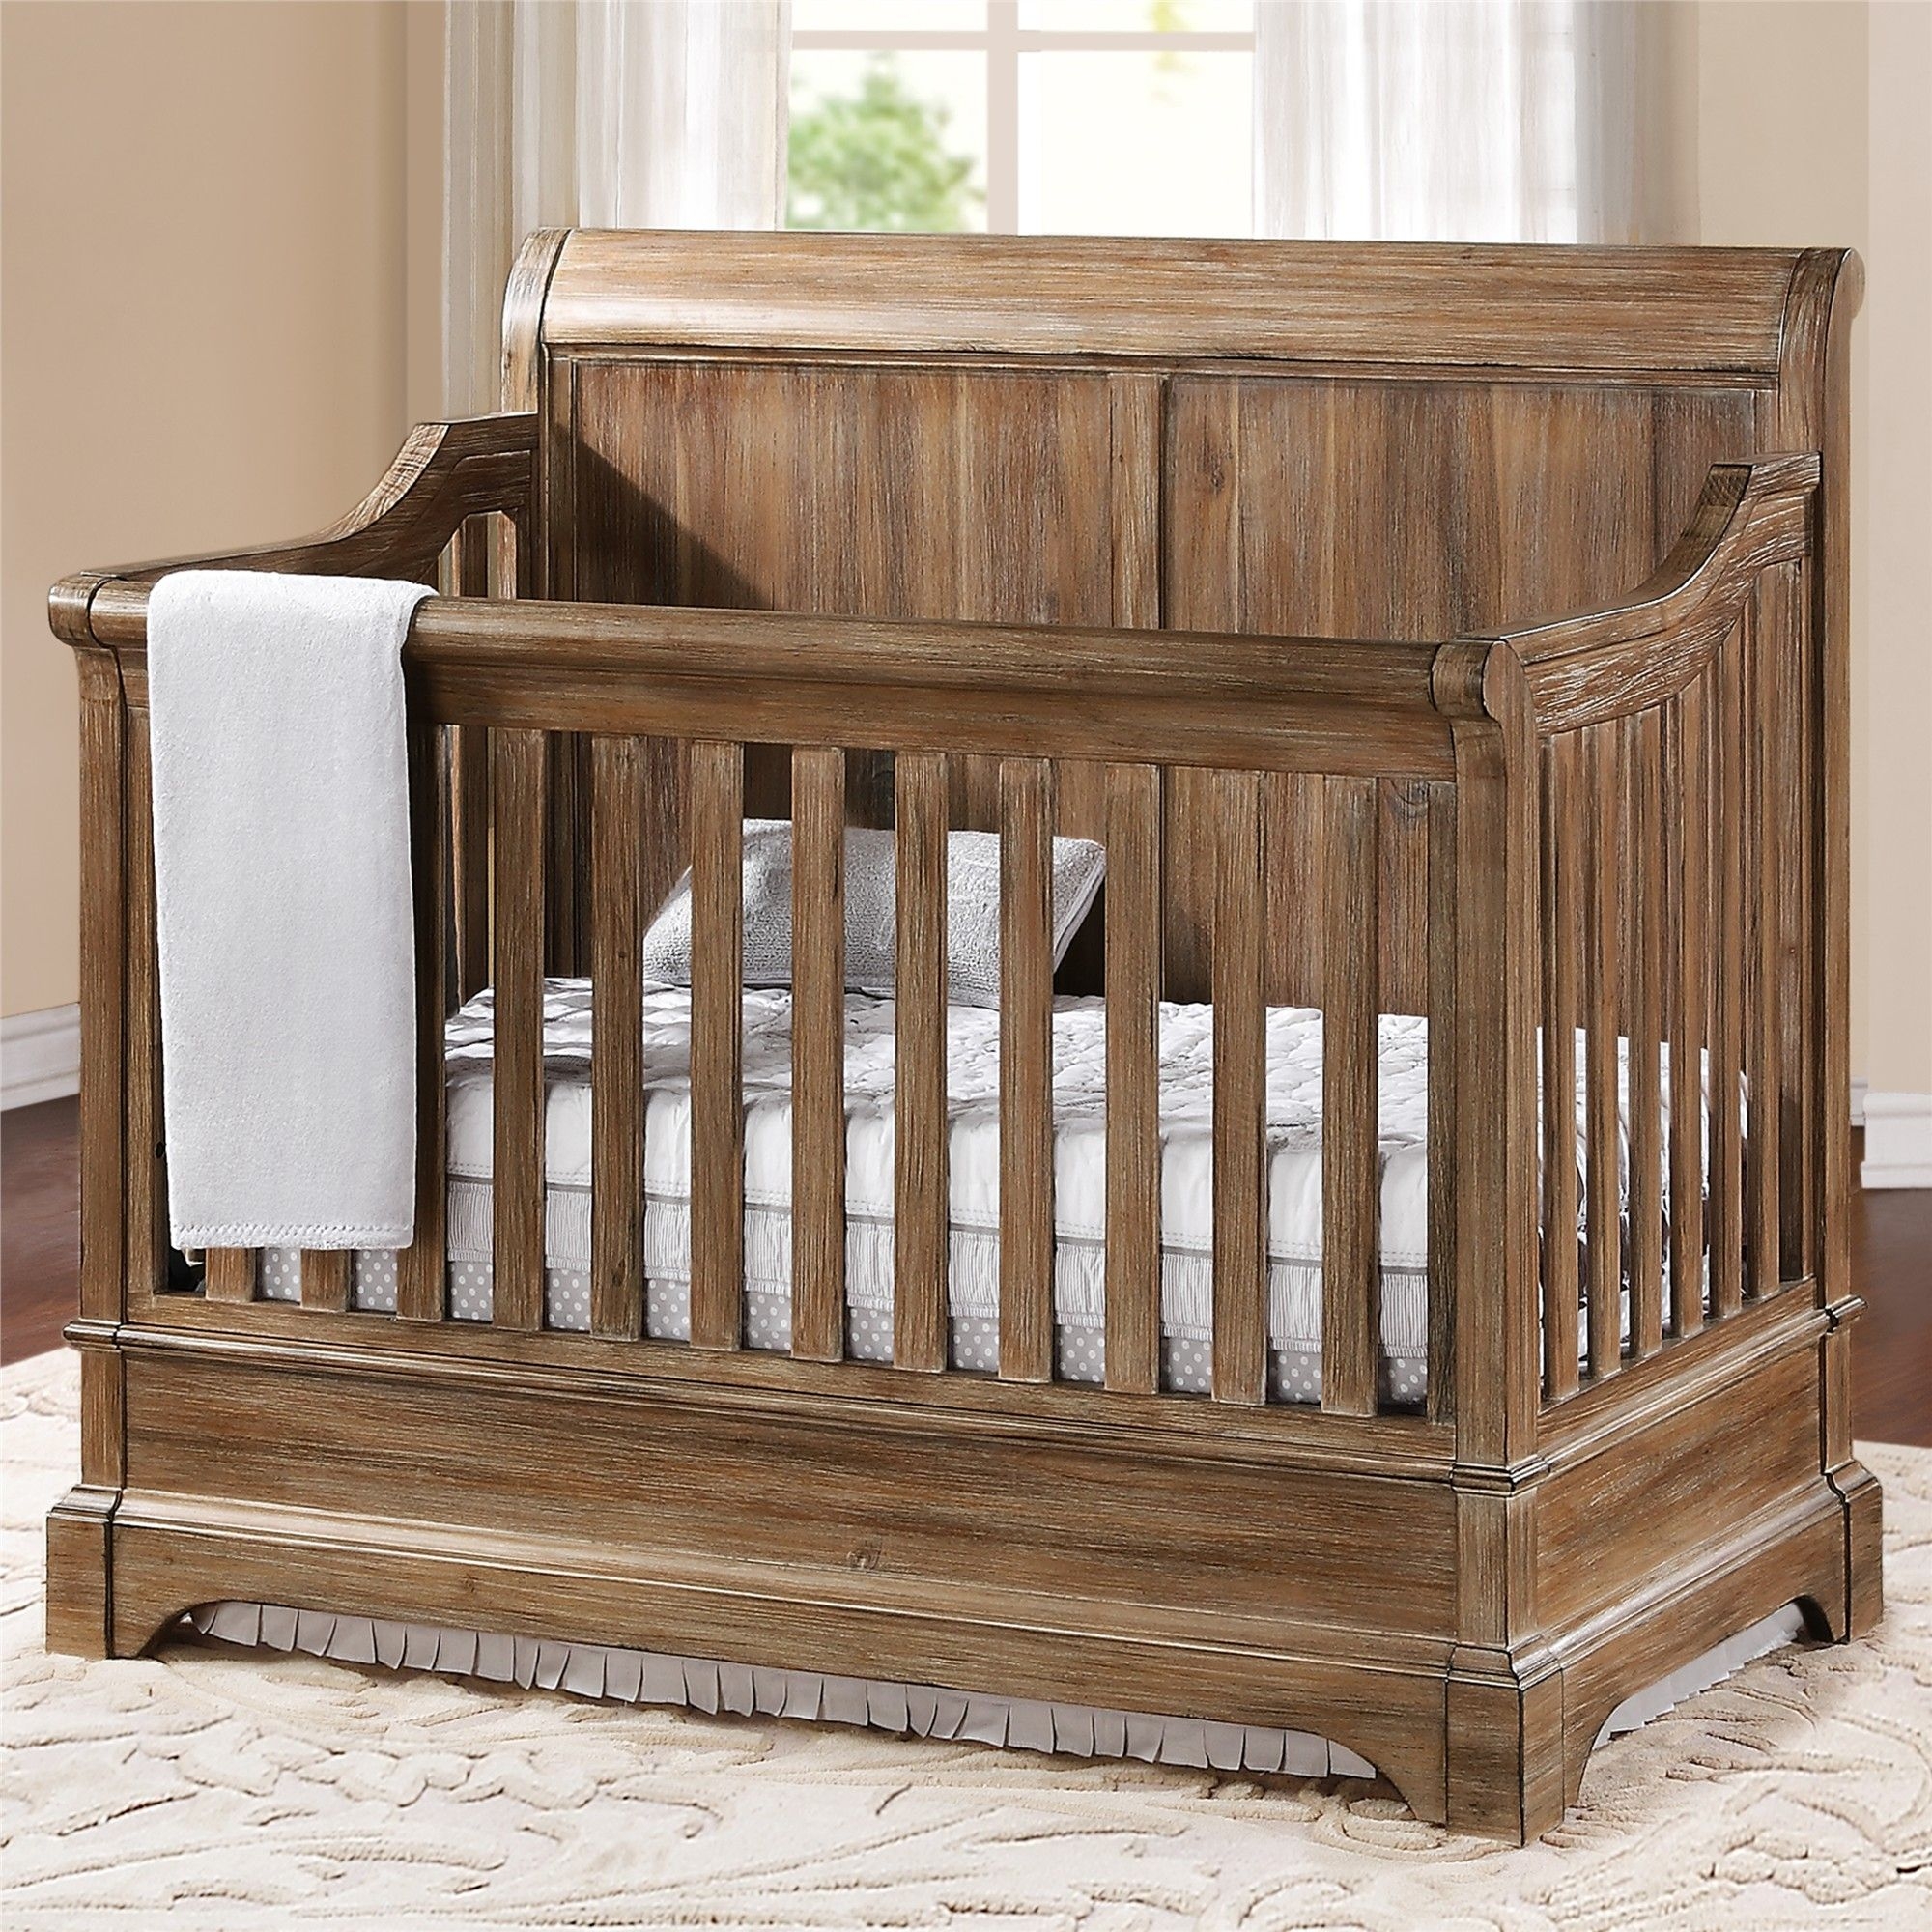 For baby crib made of the solid wood added by